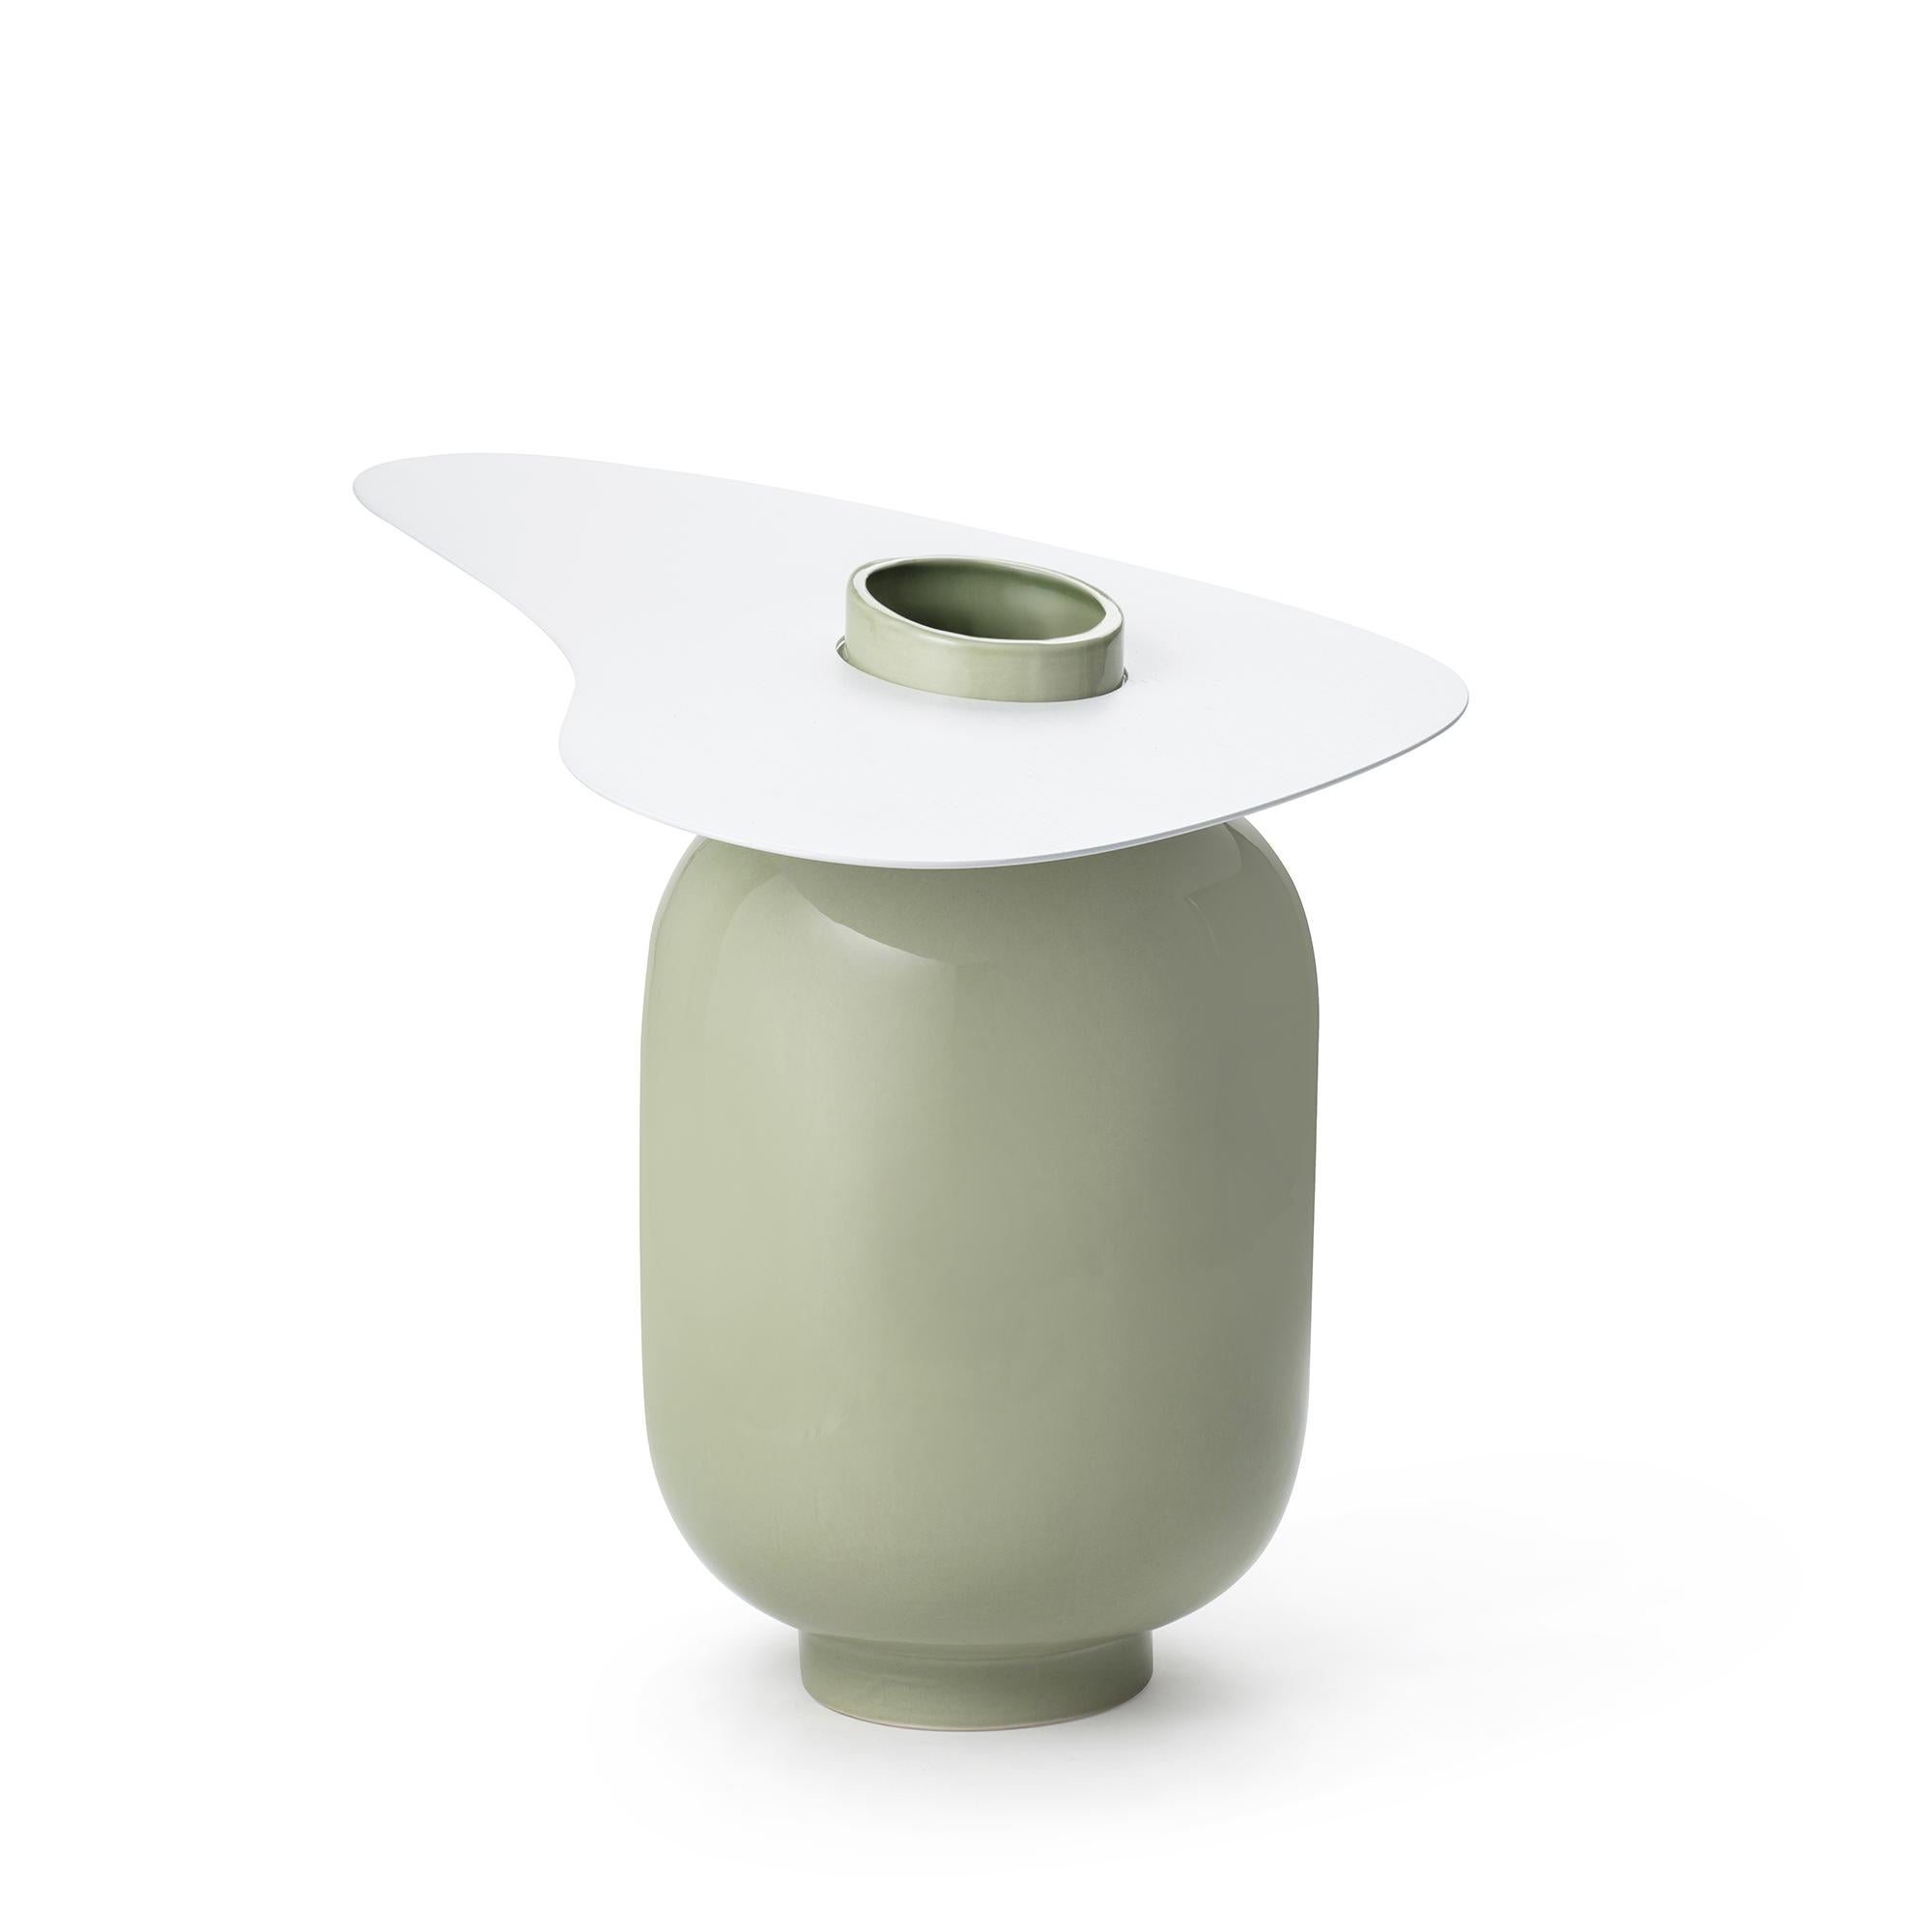 Margot L N°3 vase by Thomas Dariel 
Dimensions: D 48 x W 43.4 x H 40.5 cm 
Materials: Upper part: stainless steel with veneer and color painting in white, yellow or natural Lower part: ceramic with glossy glazing.
Also available in colors: